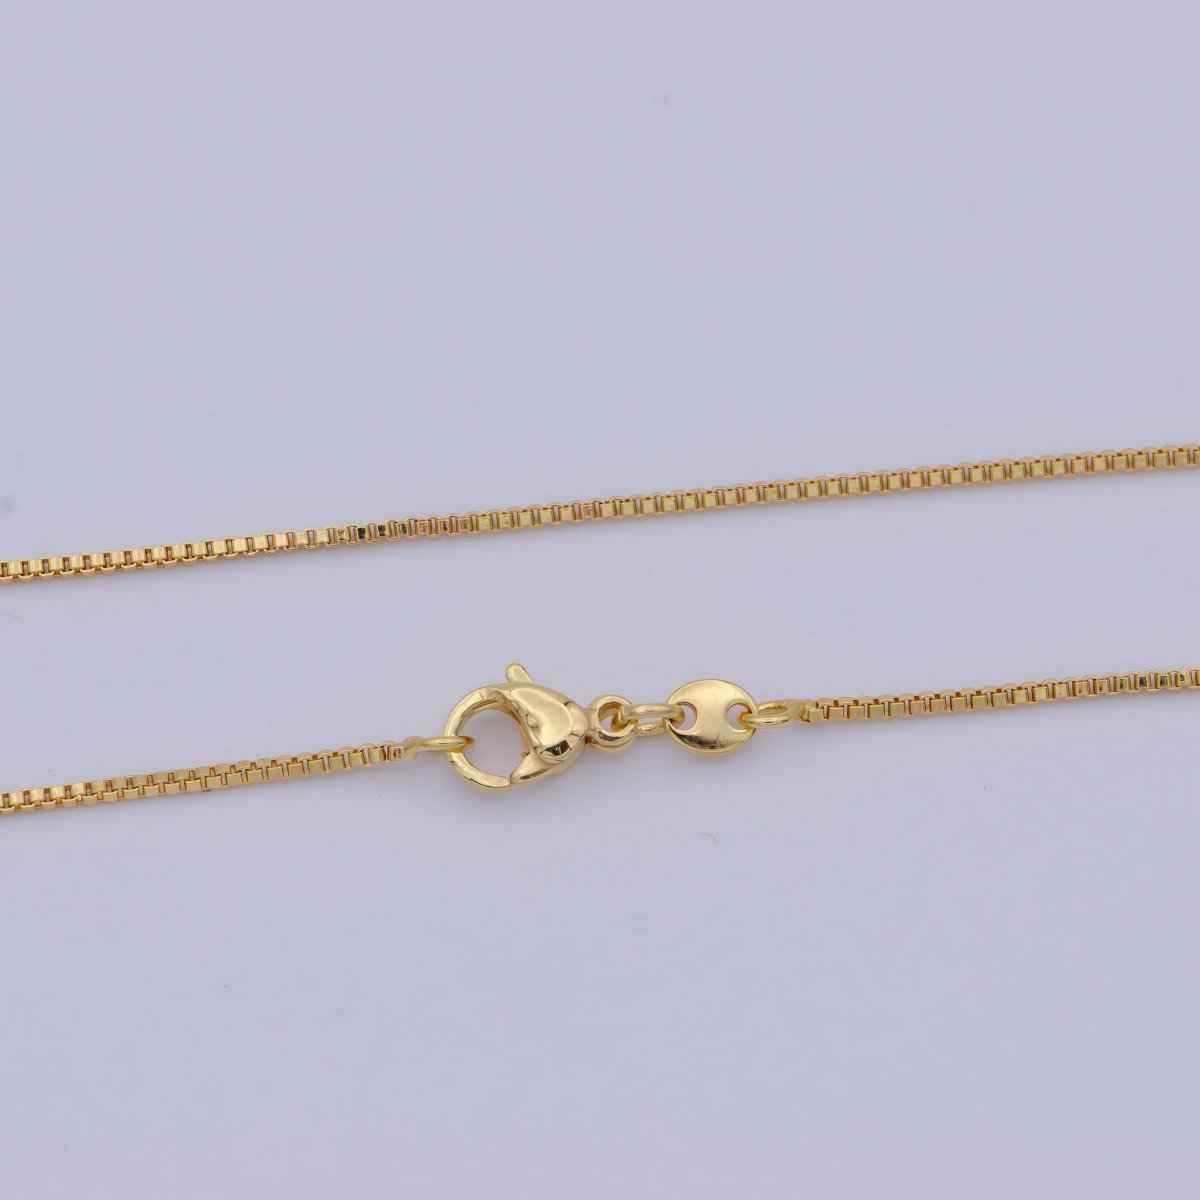 24K Gold Filled Box Chain Necklace, 20, 23.5 Inch Box Chain Necklace, Dainty 0.8mm Box Necklace | WA-469 WA-470 Clearance Pricing - DLUXCA